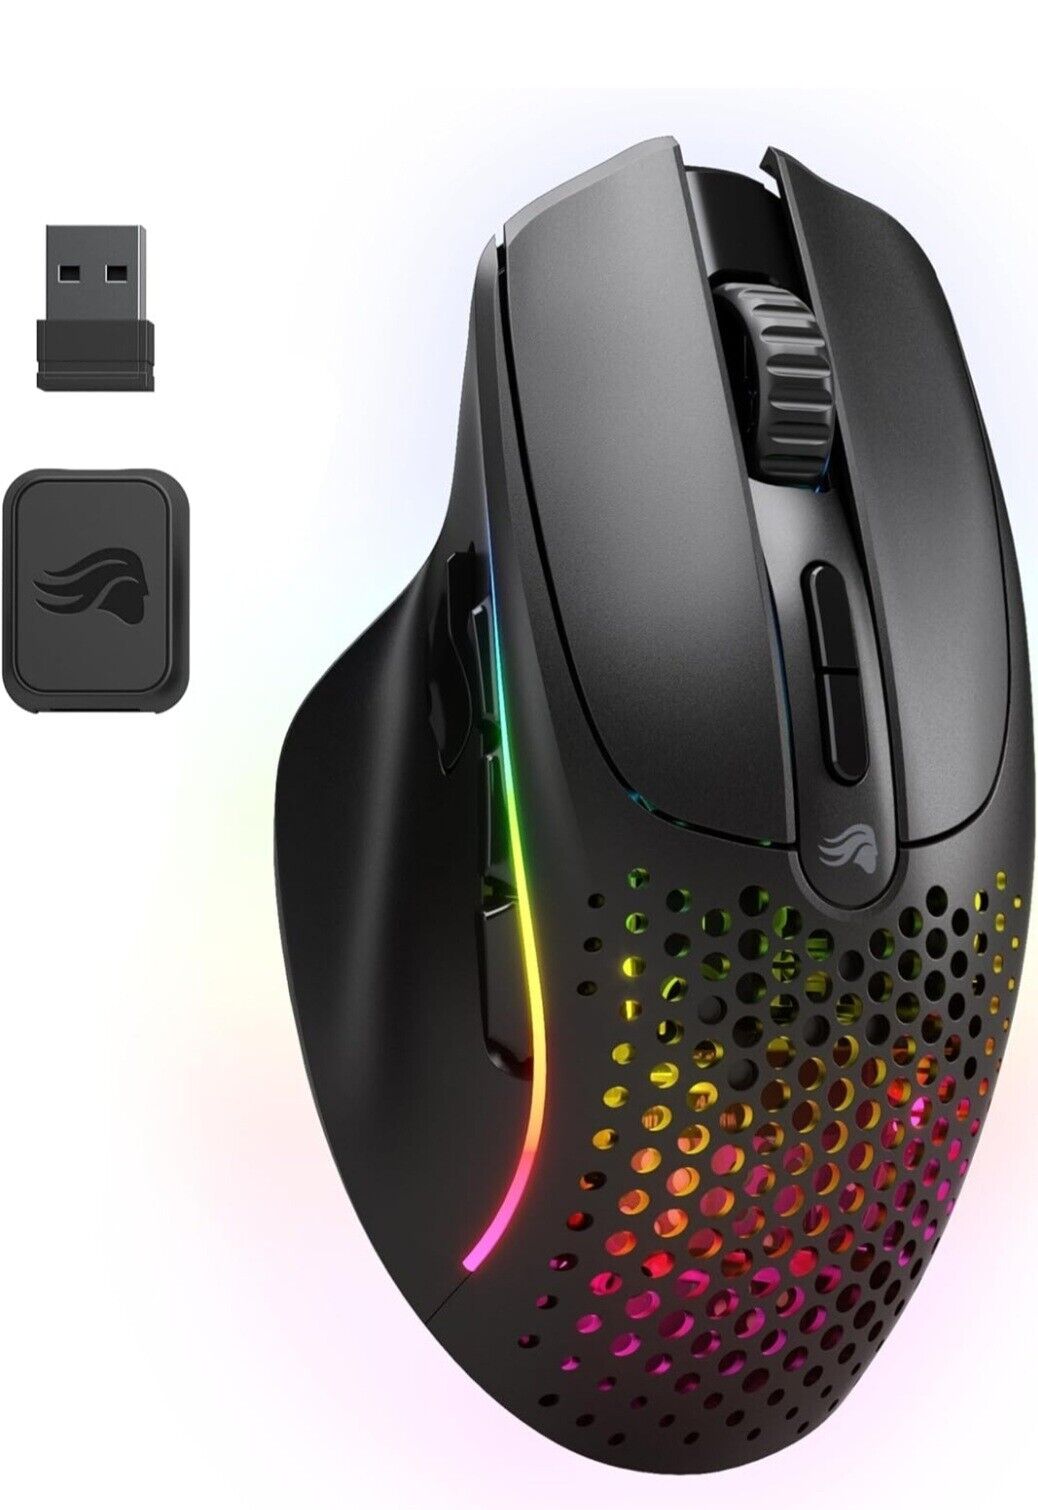 Glorious Model I 2 Wireless Optical Gaming Mouse Black BRAND NEW LOWEST PRICE